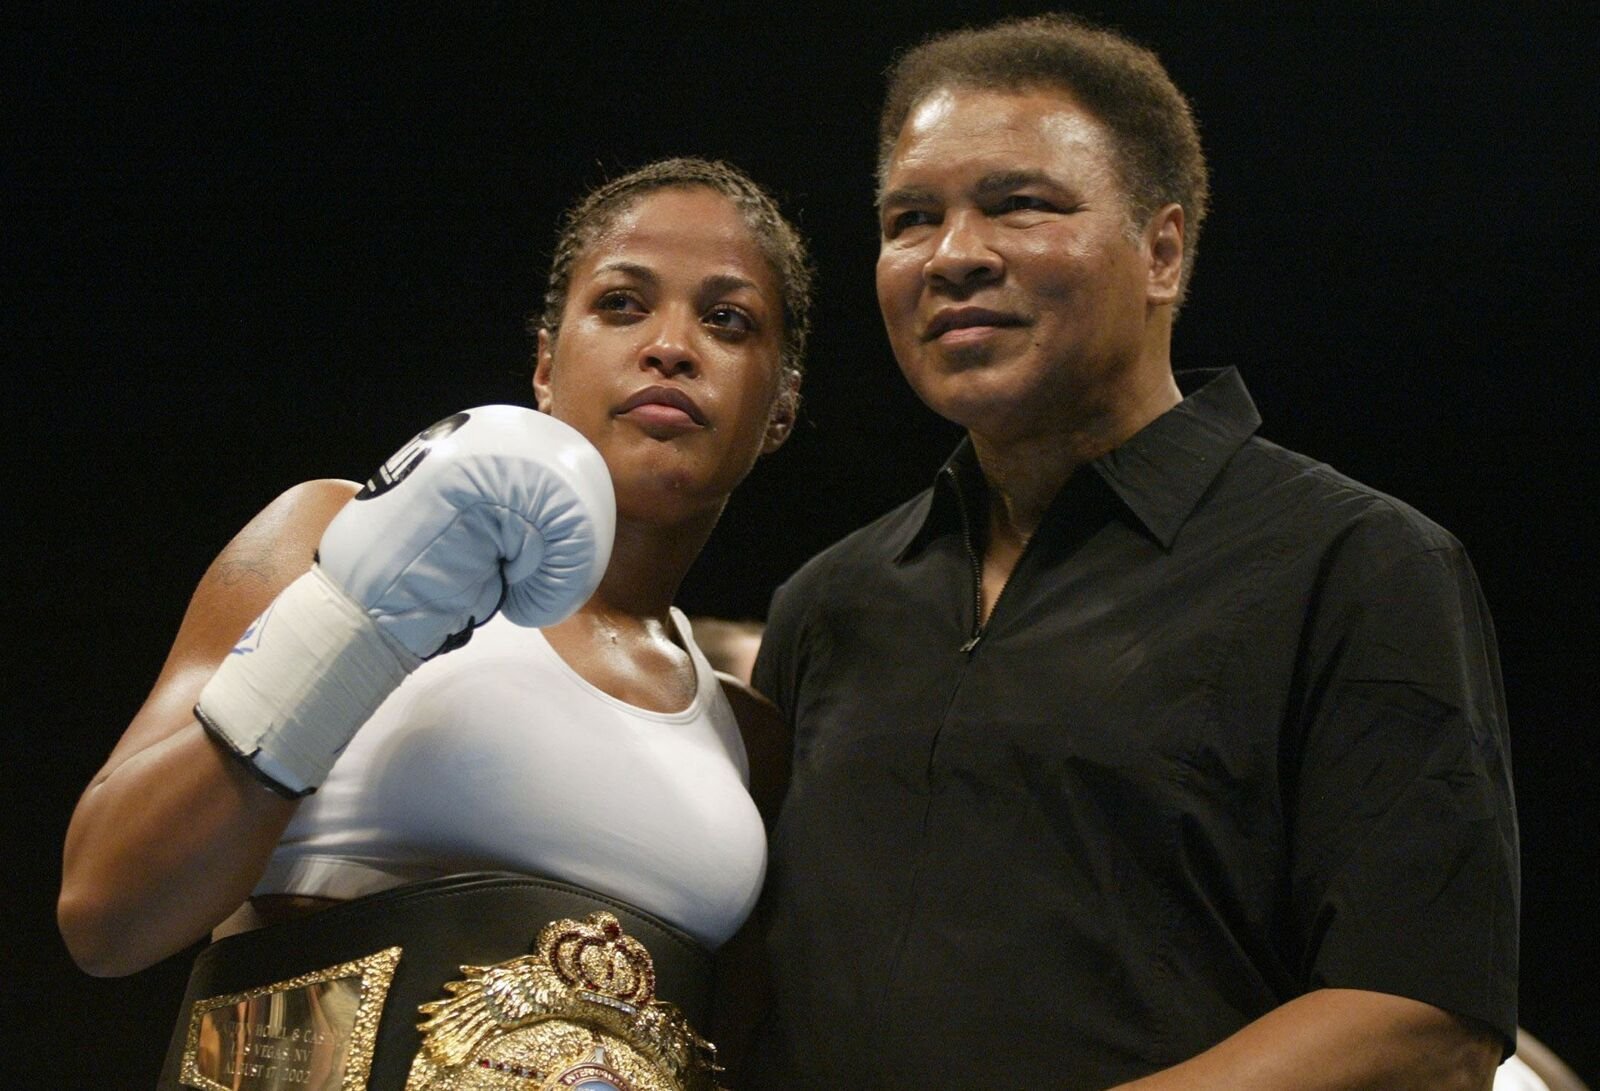 Laila Ali poses with her father, Muhammad Ali, after defeating Suzy Taylor after two rounds at the Aladdin Casino on August 17, 2002. | Photo: Getty Images 